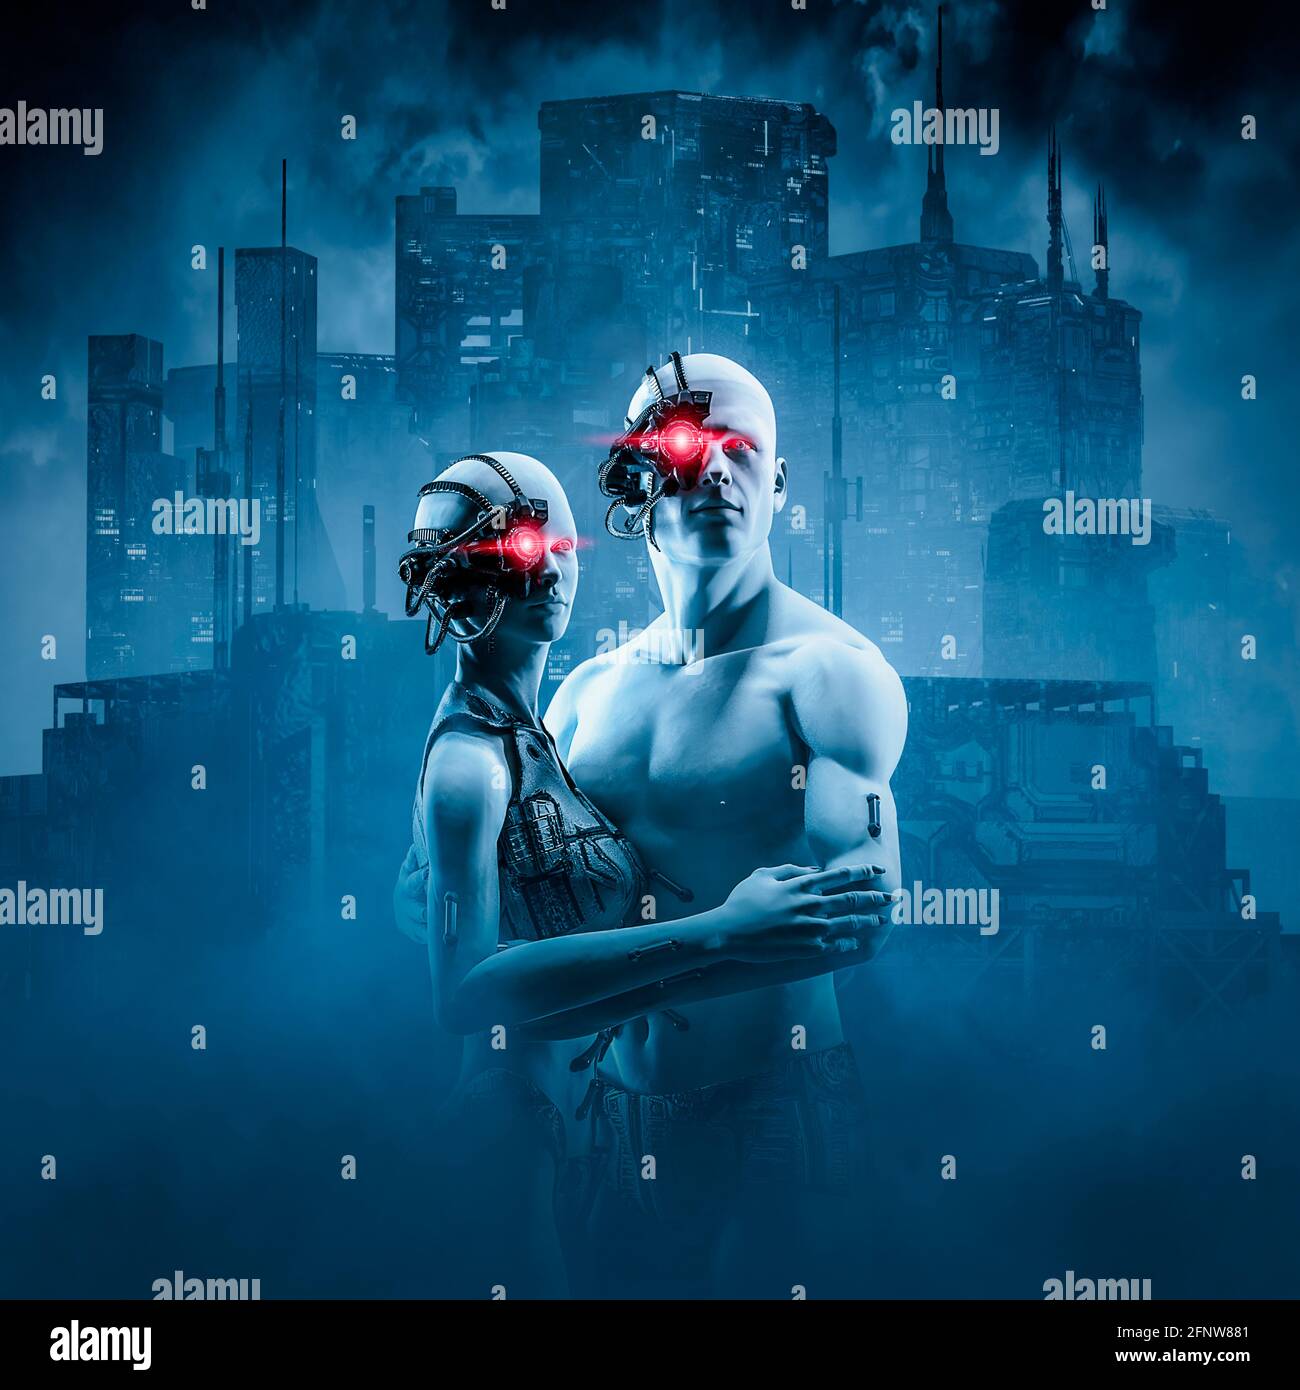 Android cyborg couple / 3D illustration of science fiction male and female robot with glowing red robotic eye outside dark futuristic city Stock Photo